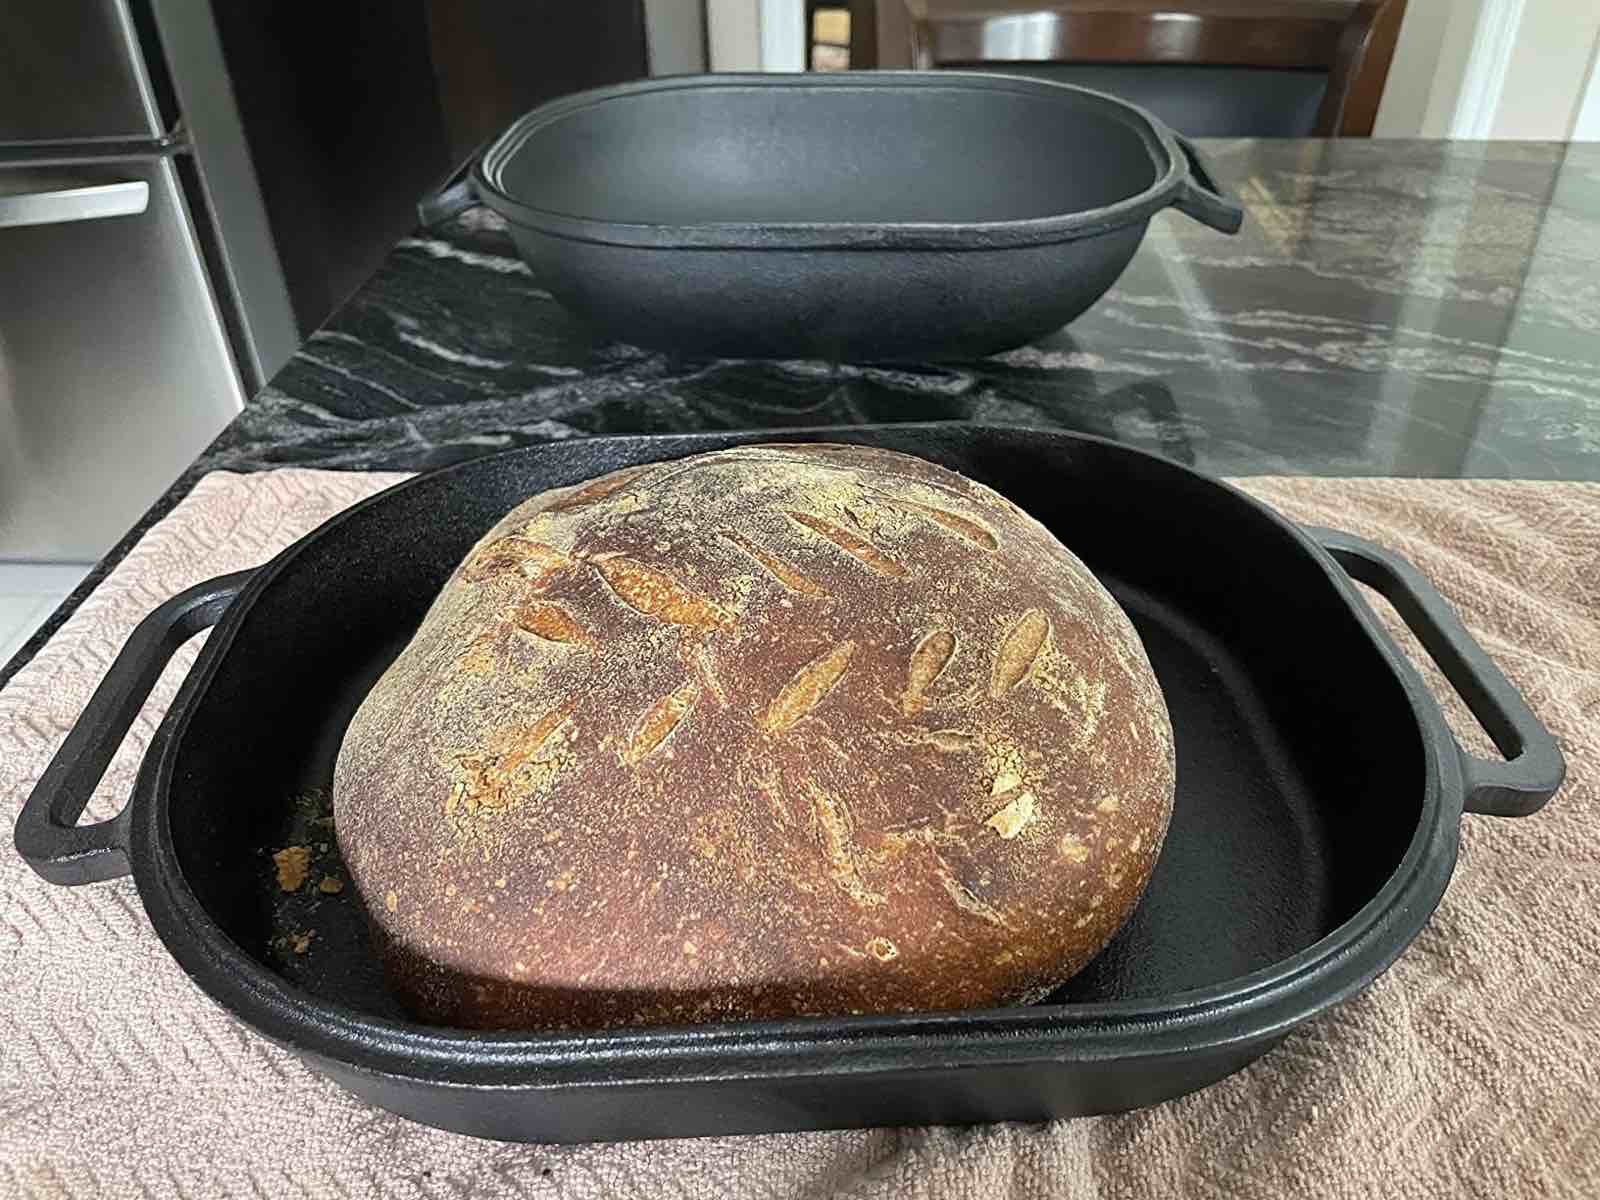 cuisiland-bbc139-cast-iron-bread-oven-loaf-pan-loaf-1